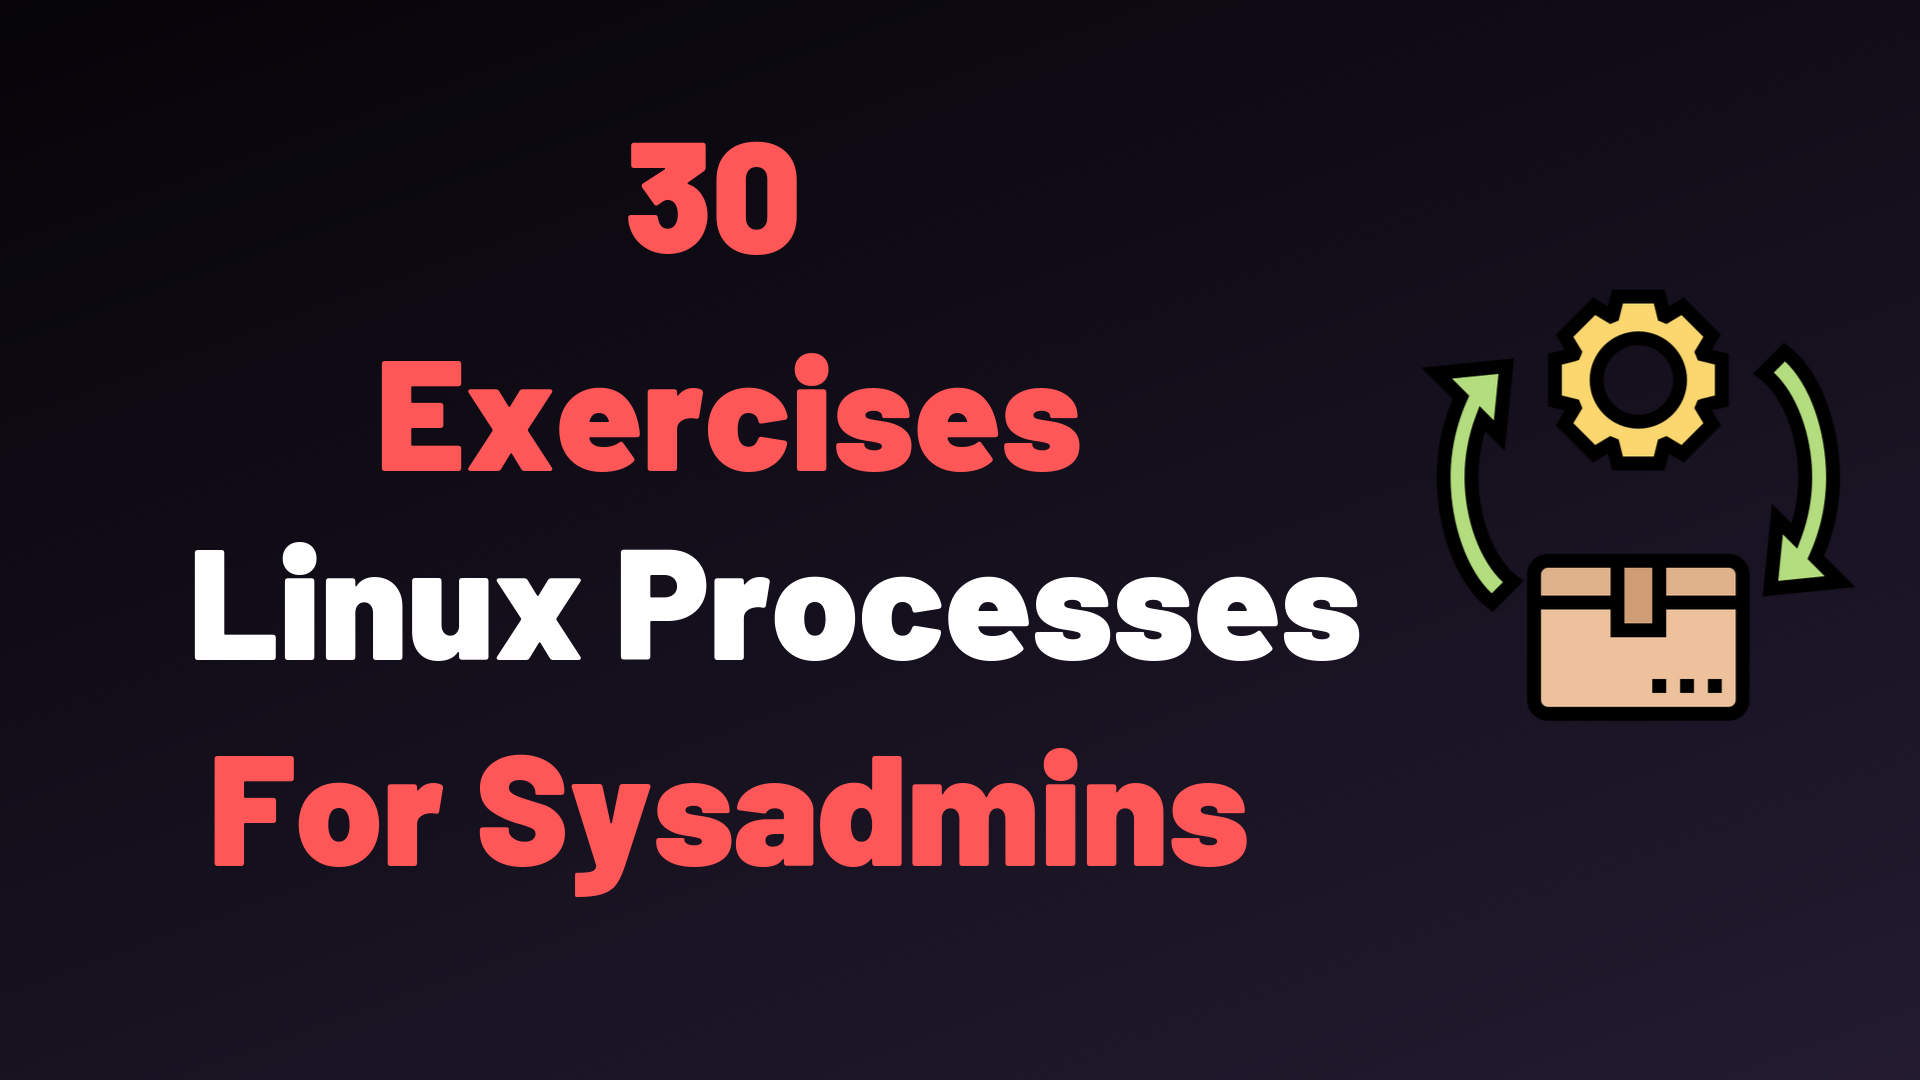 30 Linux Processes Exercises For Sysadmins